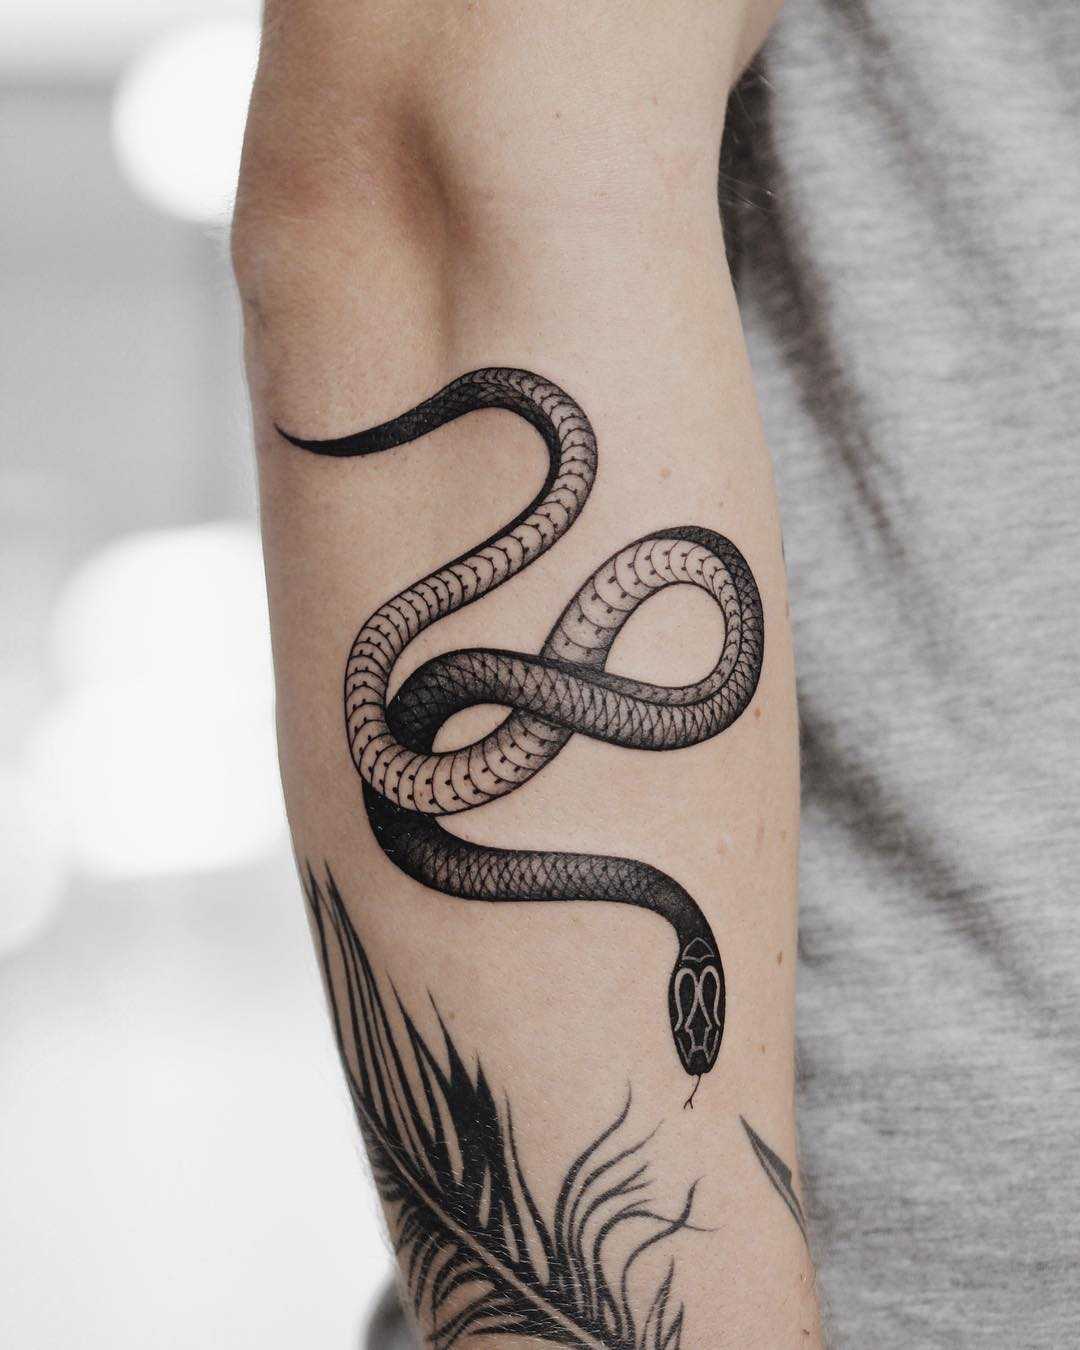 Small black snake on the forearm